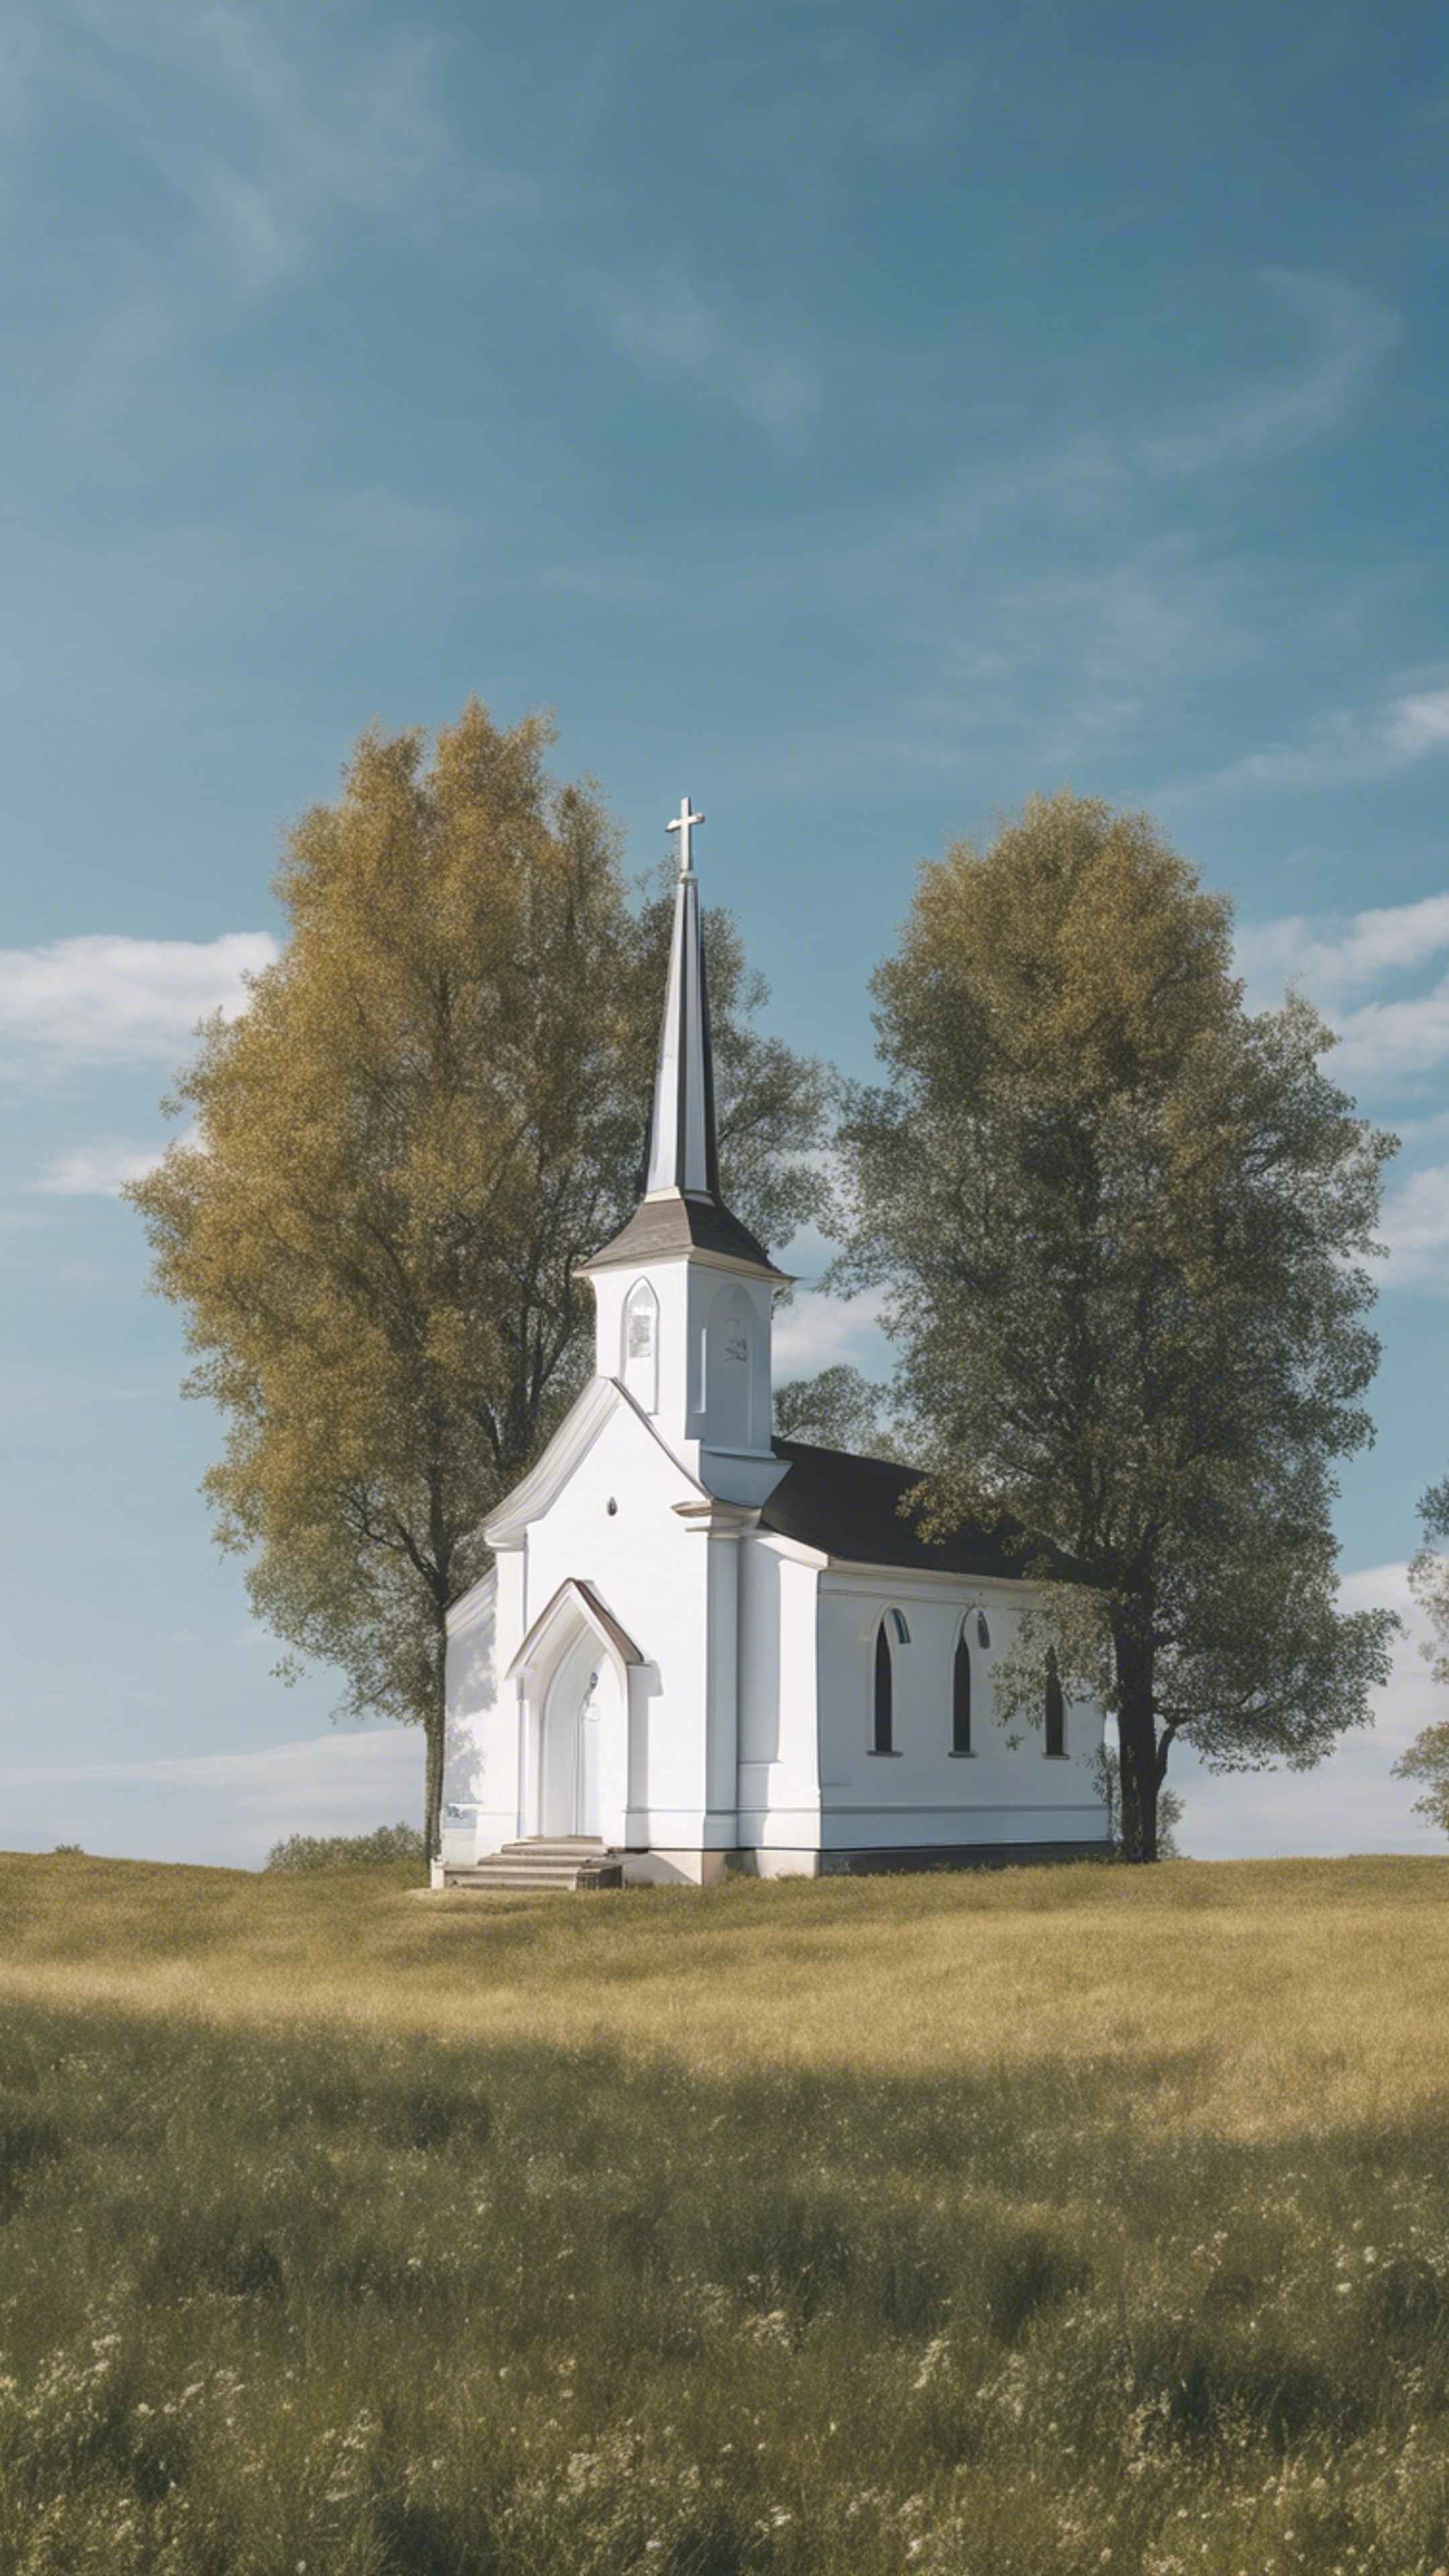 A small white church in a scenic country landscape with a clear blue sky overhead. Wallpaper[5ce86835ed5644e9bdfa]